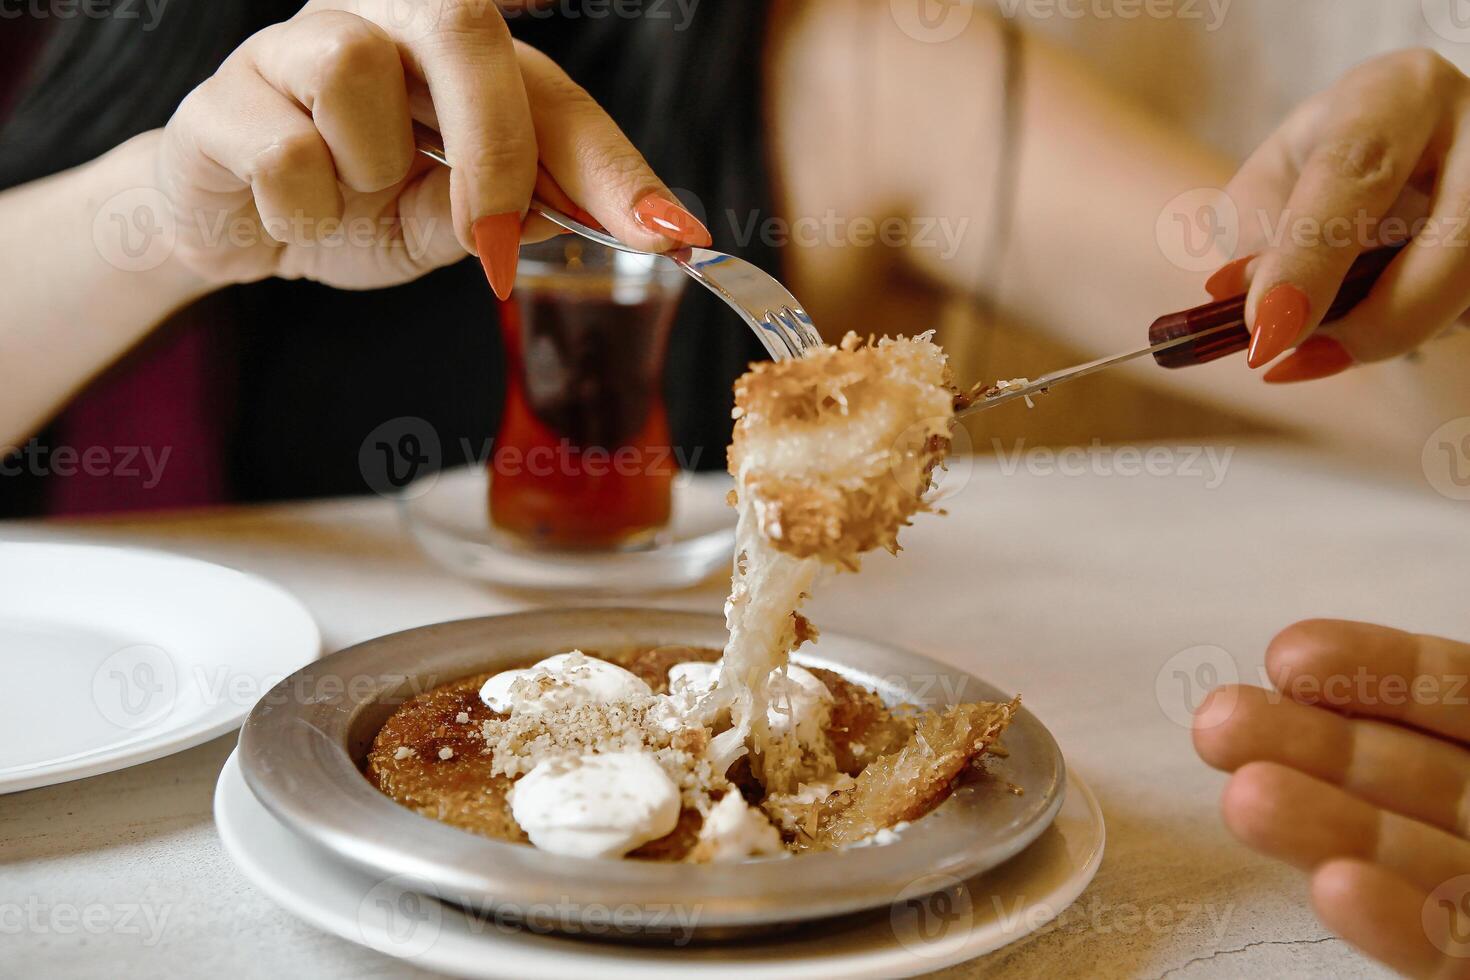 Woman Eating Plate of Food With Fork photo